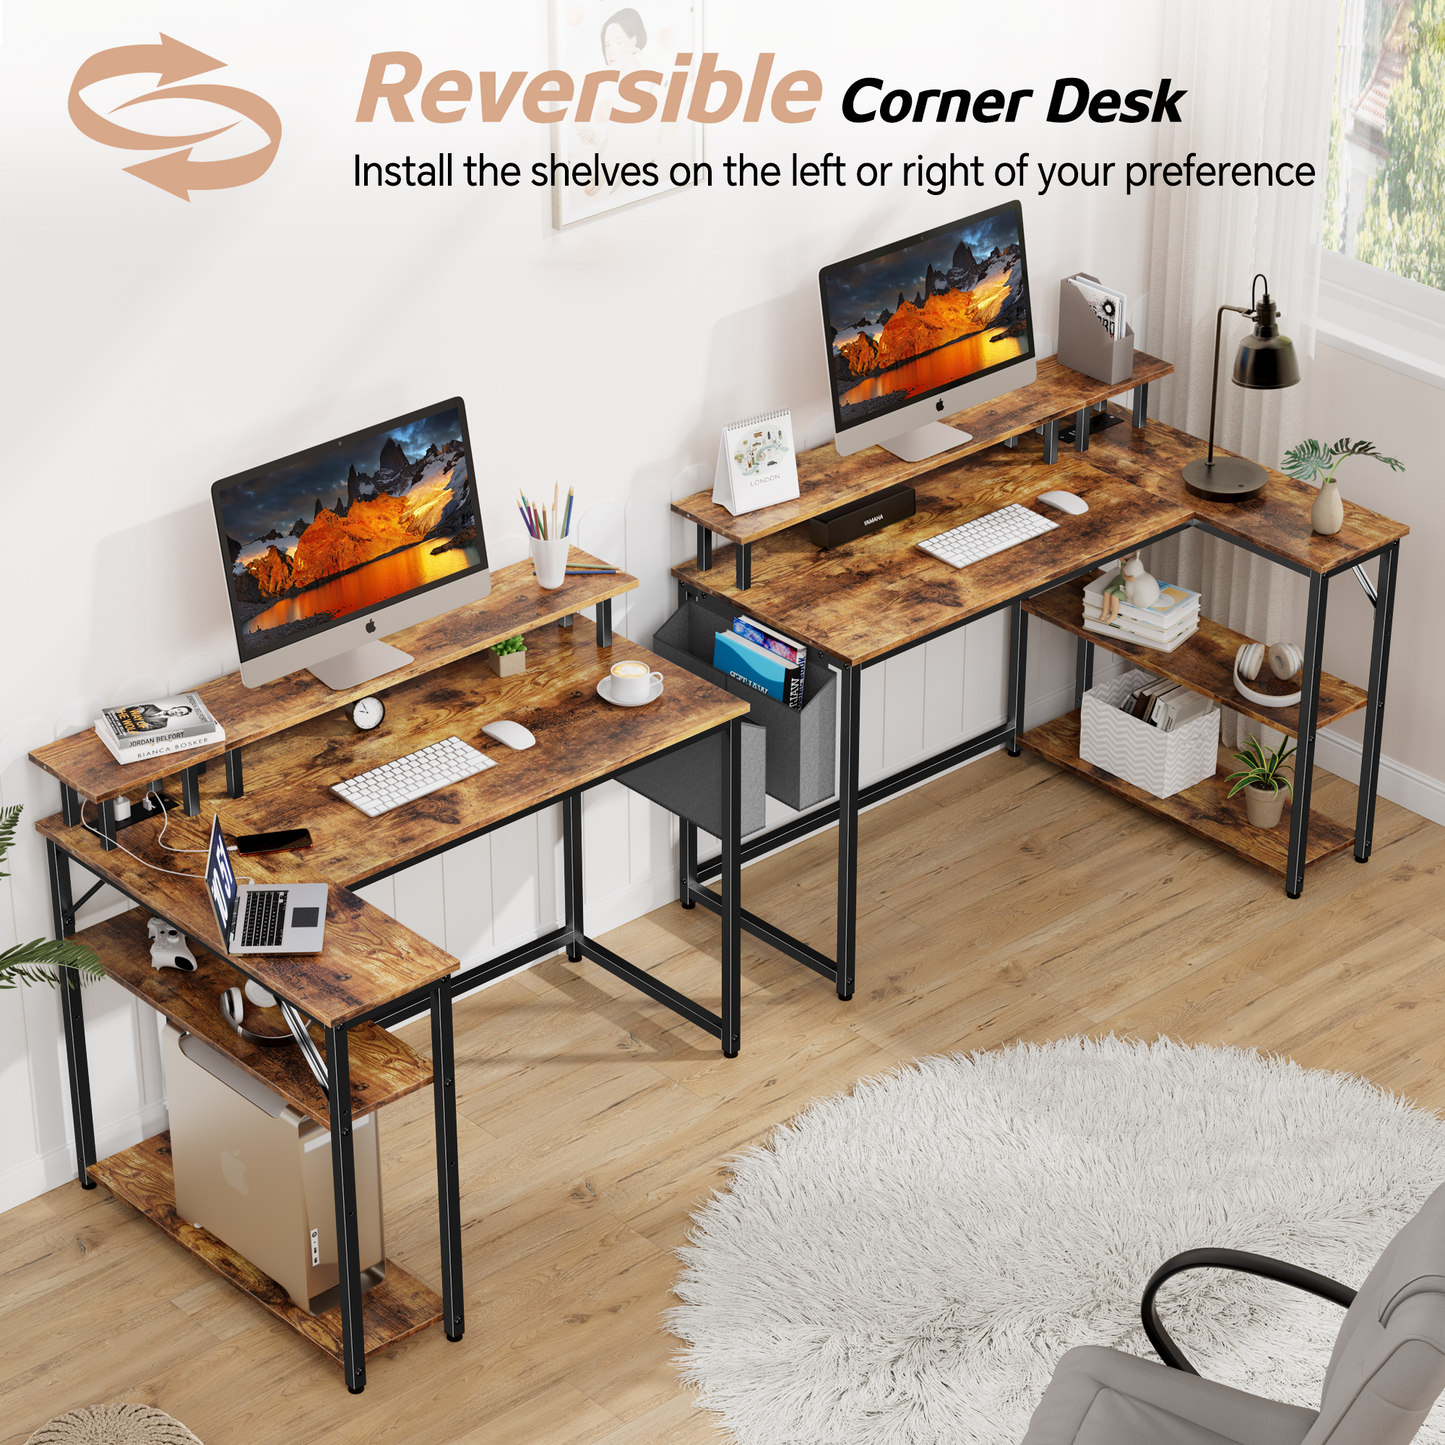 Mr IRONSTONE L Shaped Desk with Power Outlets & LED Lights, Computer Desk with Long Monitor Stand, 47 Inch Office Desk, Corner Desk for Small Space, Home Office Desk, Rustic Brown